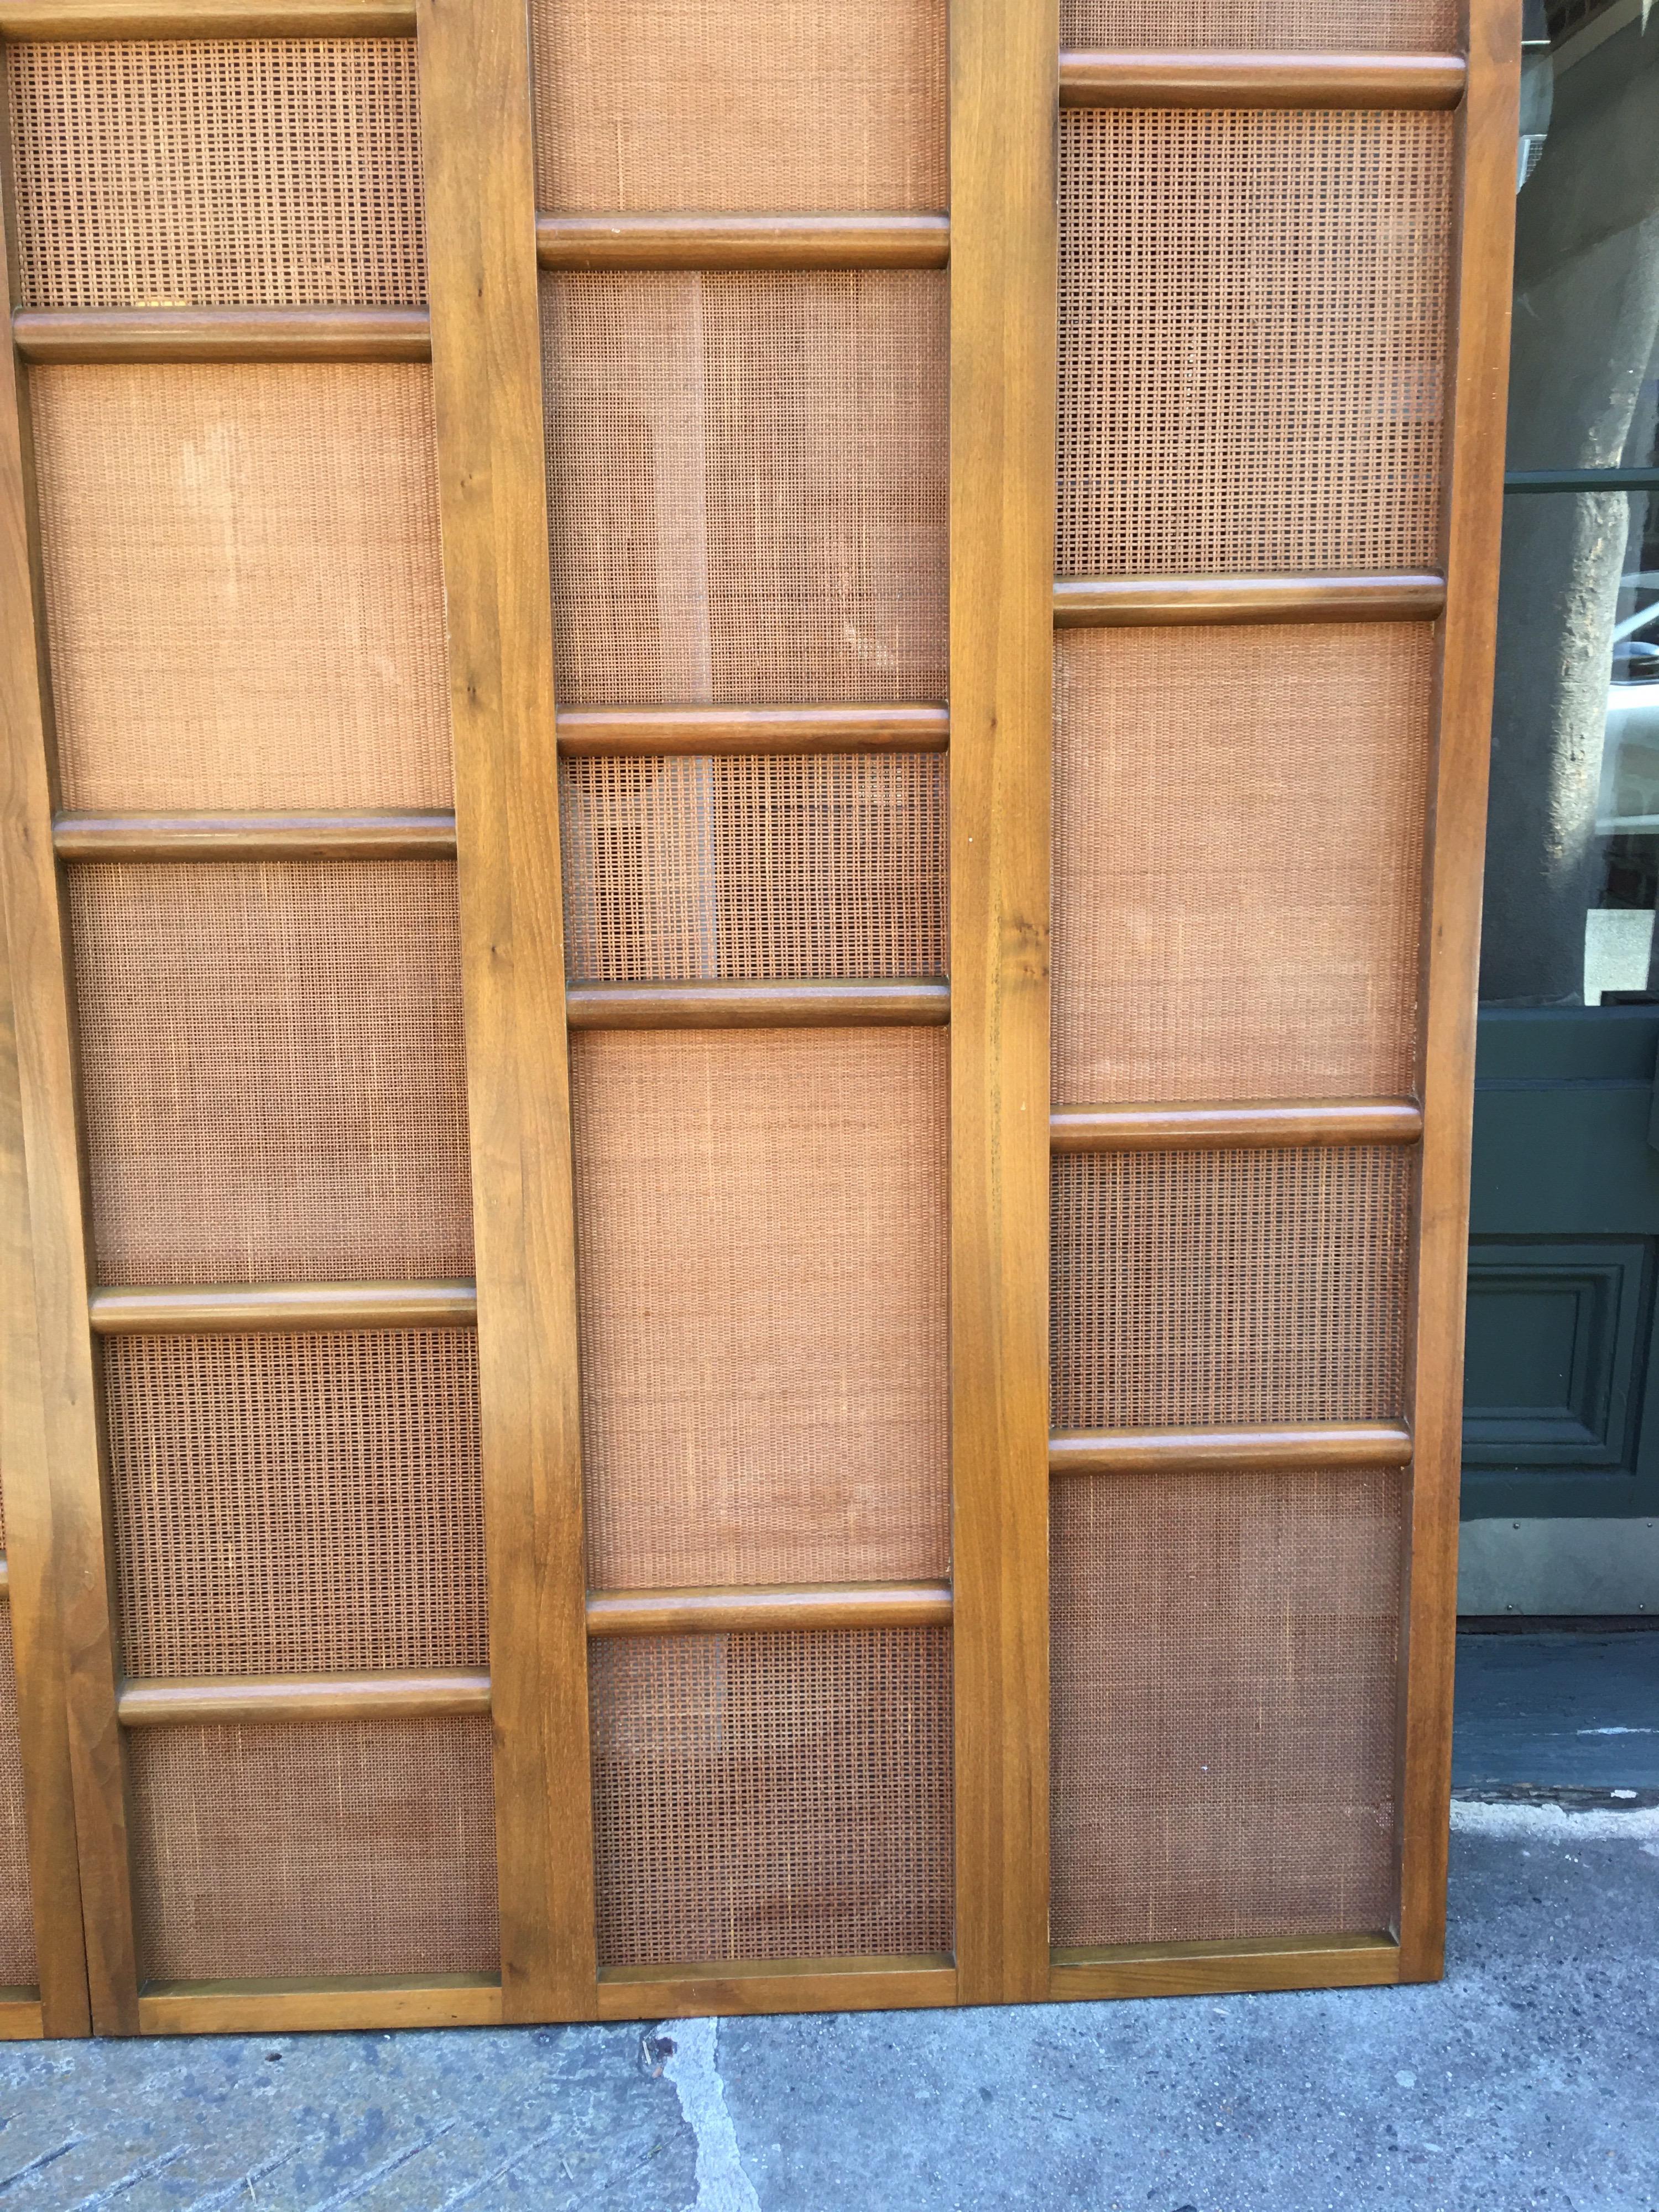 Beautifully made 9 feet high privacy panels from a Newark NJ Office Building designed in the early 1960s. Walnut construction with a variation of caning gives these panels an impressive look! Would be great to join the pair together with hinges to